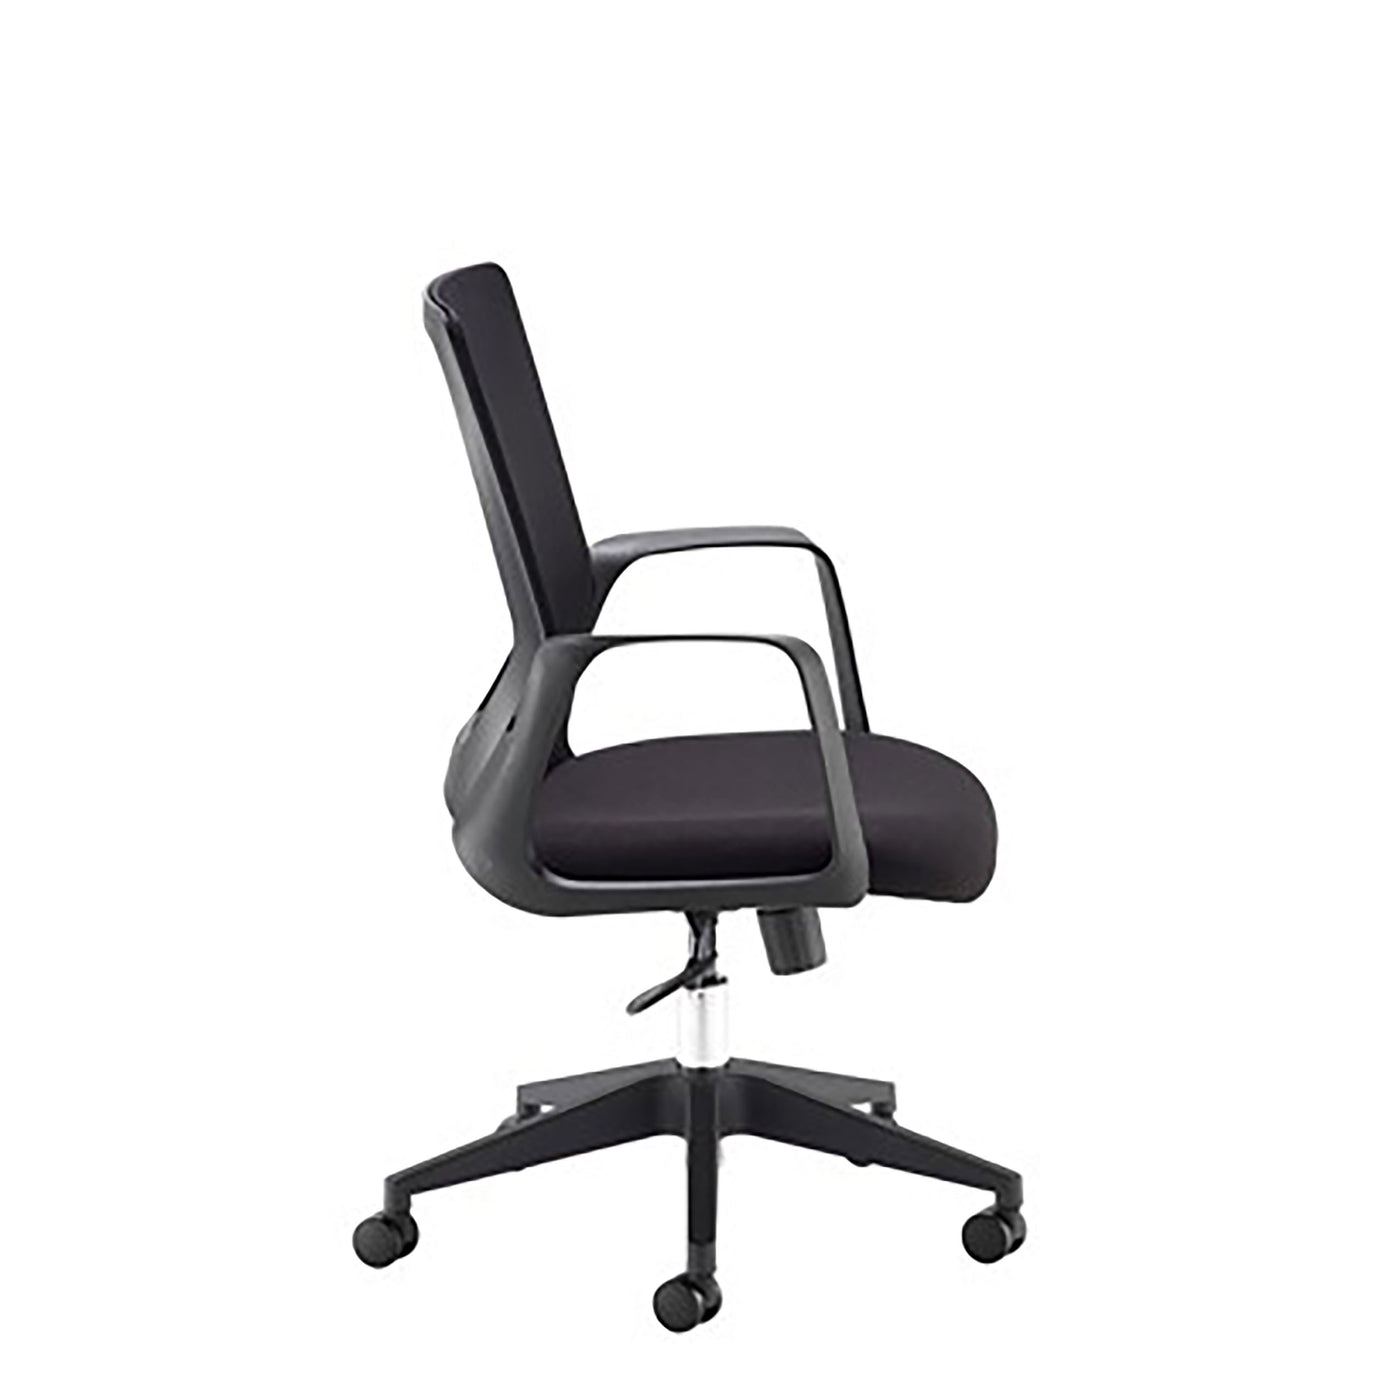 Toto Mesh Back Home Office Chair | Ergonomic Home Office Chair | Home Office Furniture